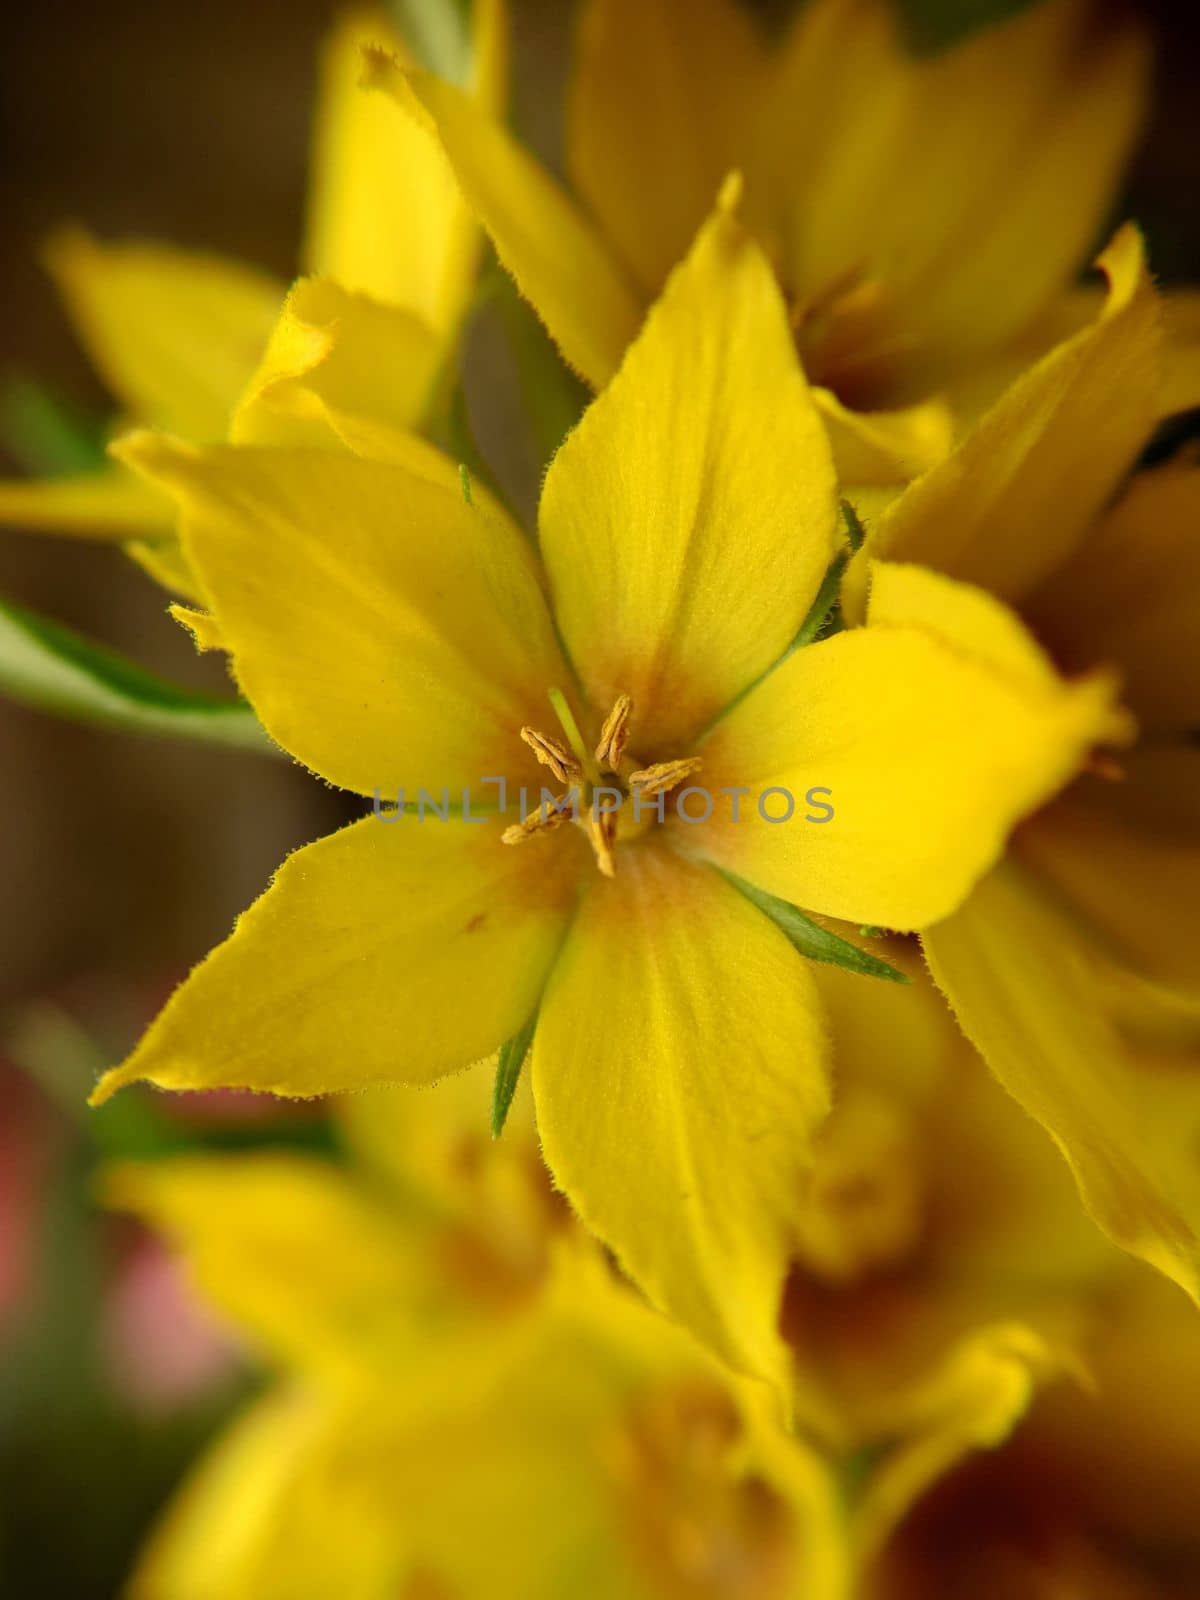 Background image of a yellow flower close-up by Mastak80